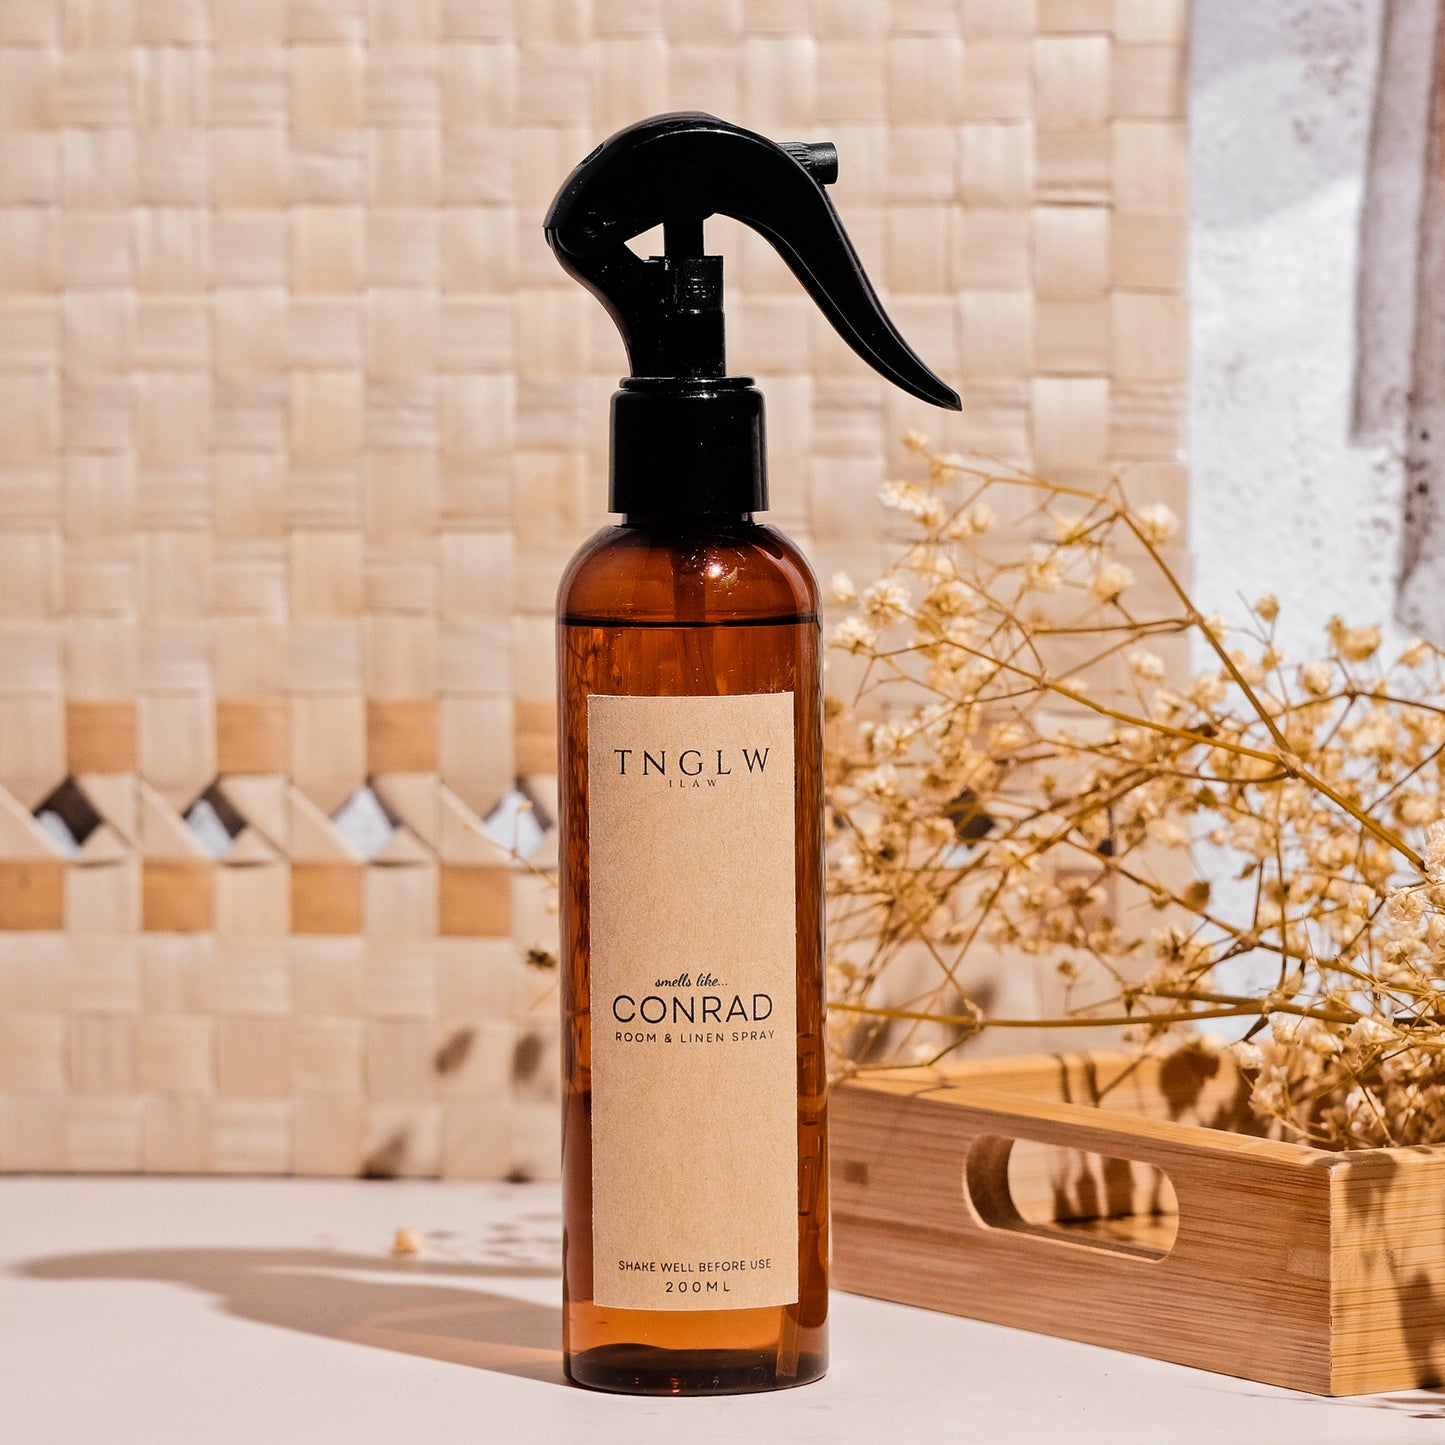 Alcohol-Free Room & Linen Spray Hotel Inspired Scent